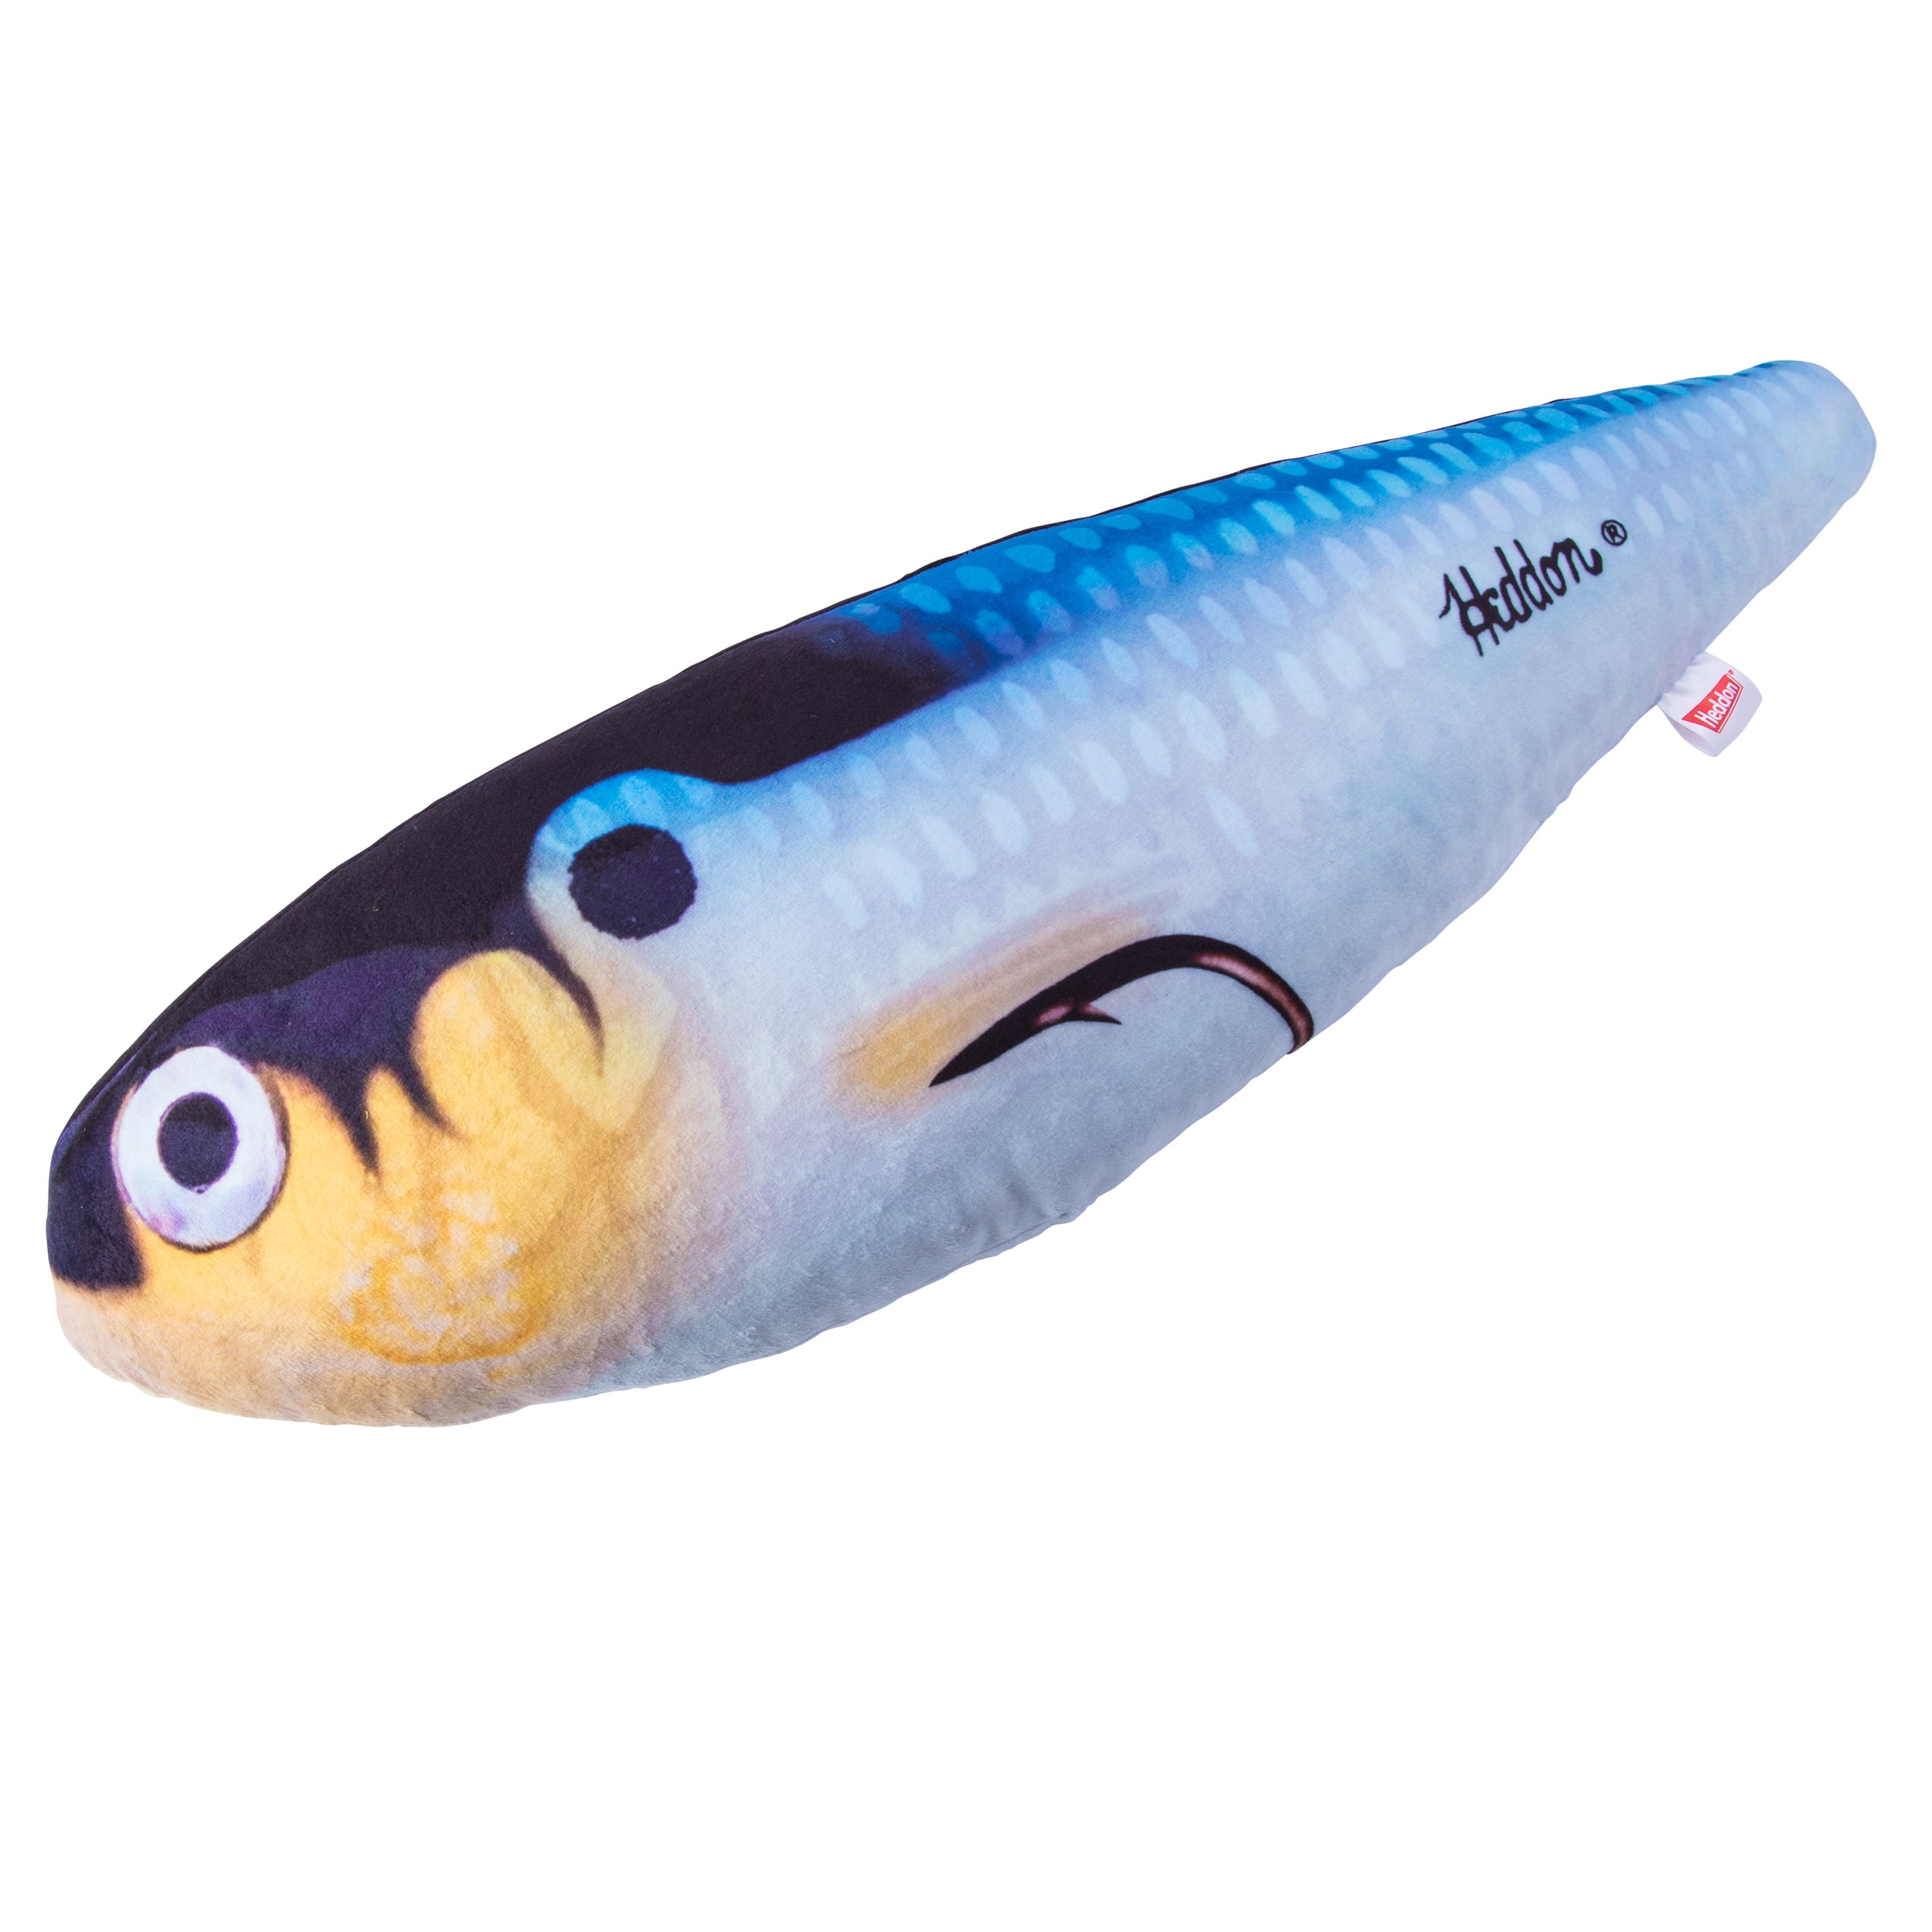 Musky Mania 7 Lil Doc Topwater Lure - Live Image Pogie 